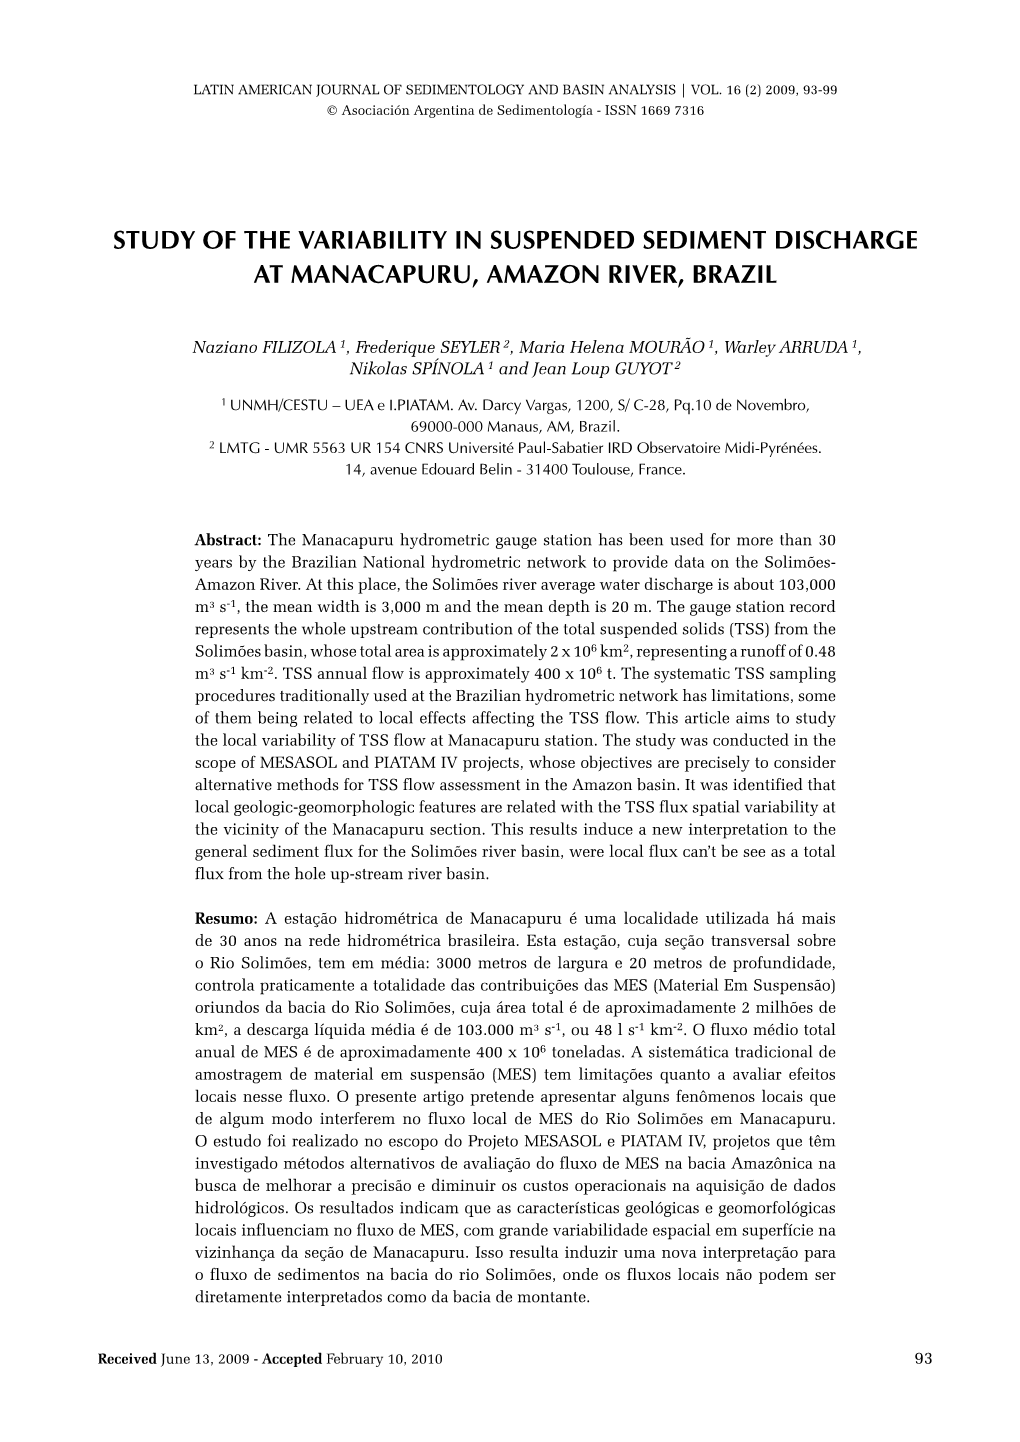 Study of the Variability in Suspended Sediments Discharge at Manacapuru, Amazon River, Brazil